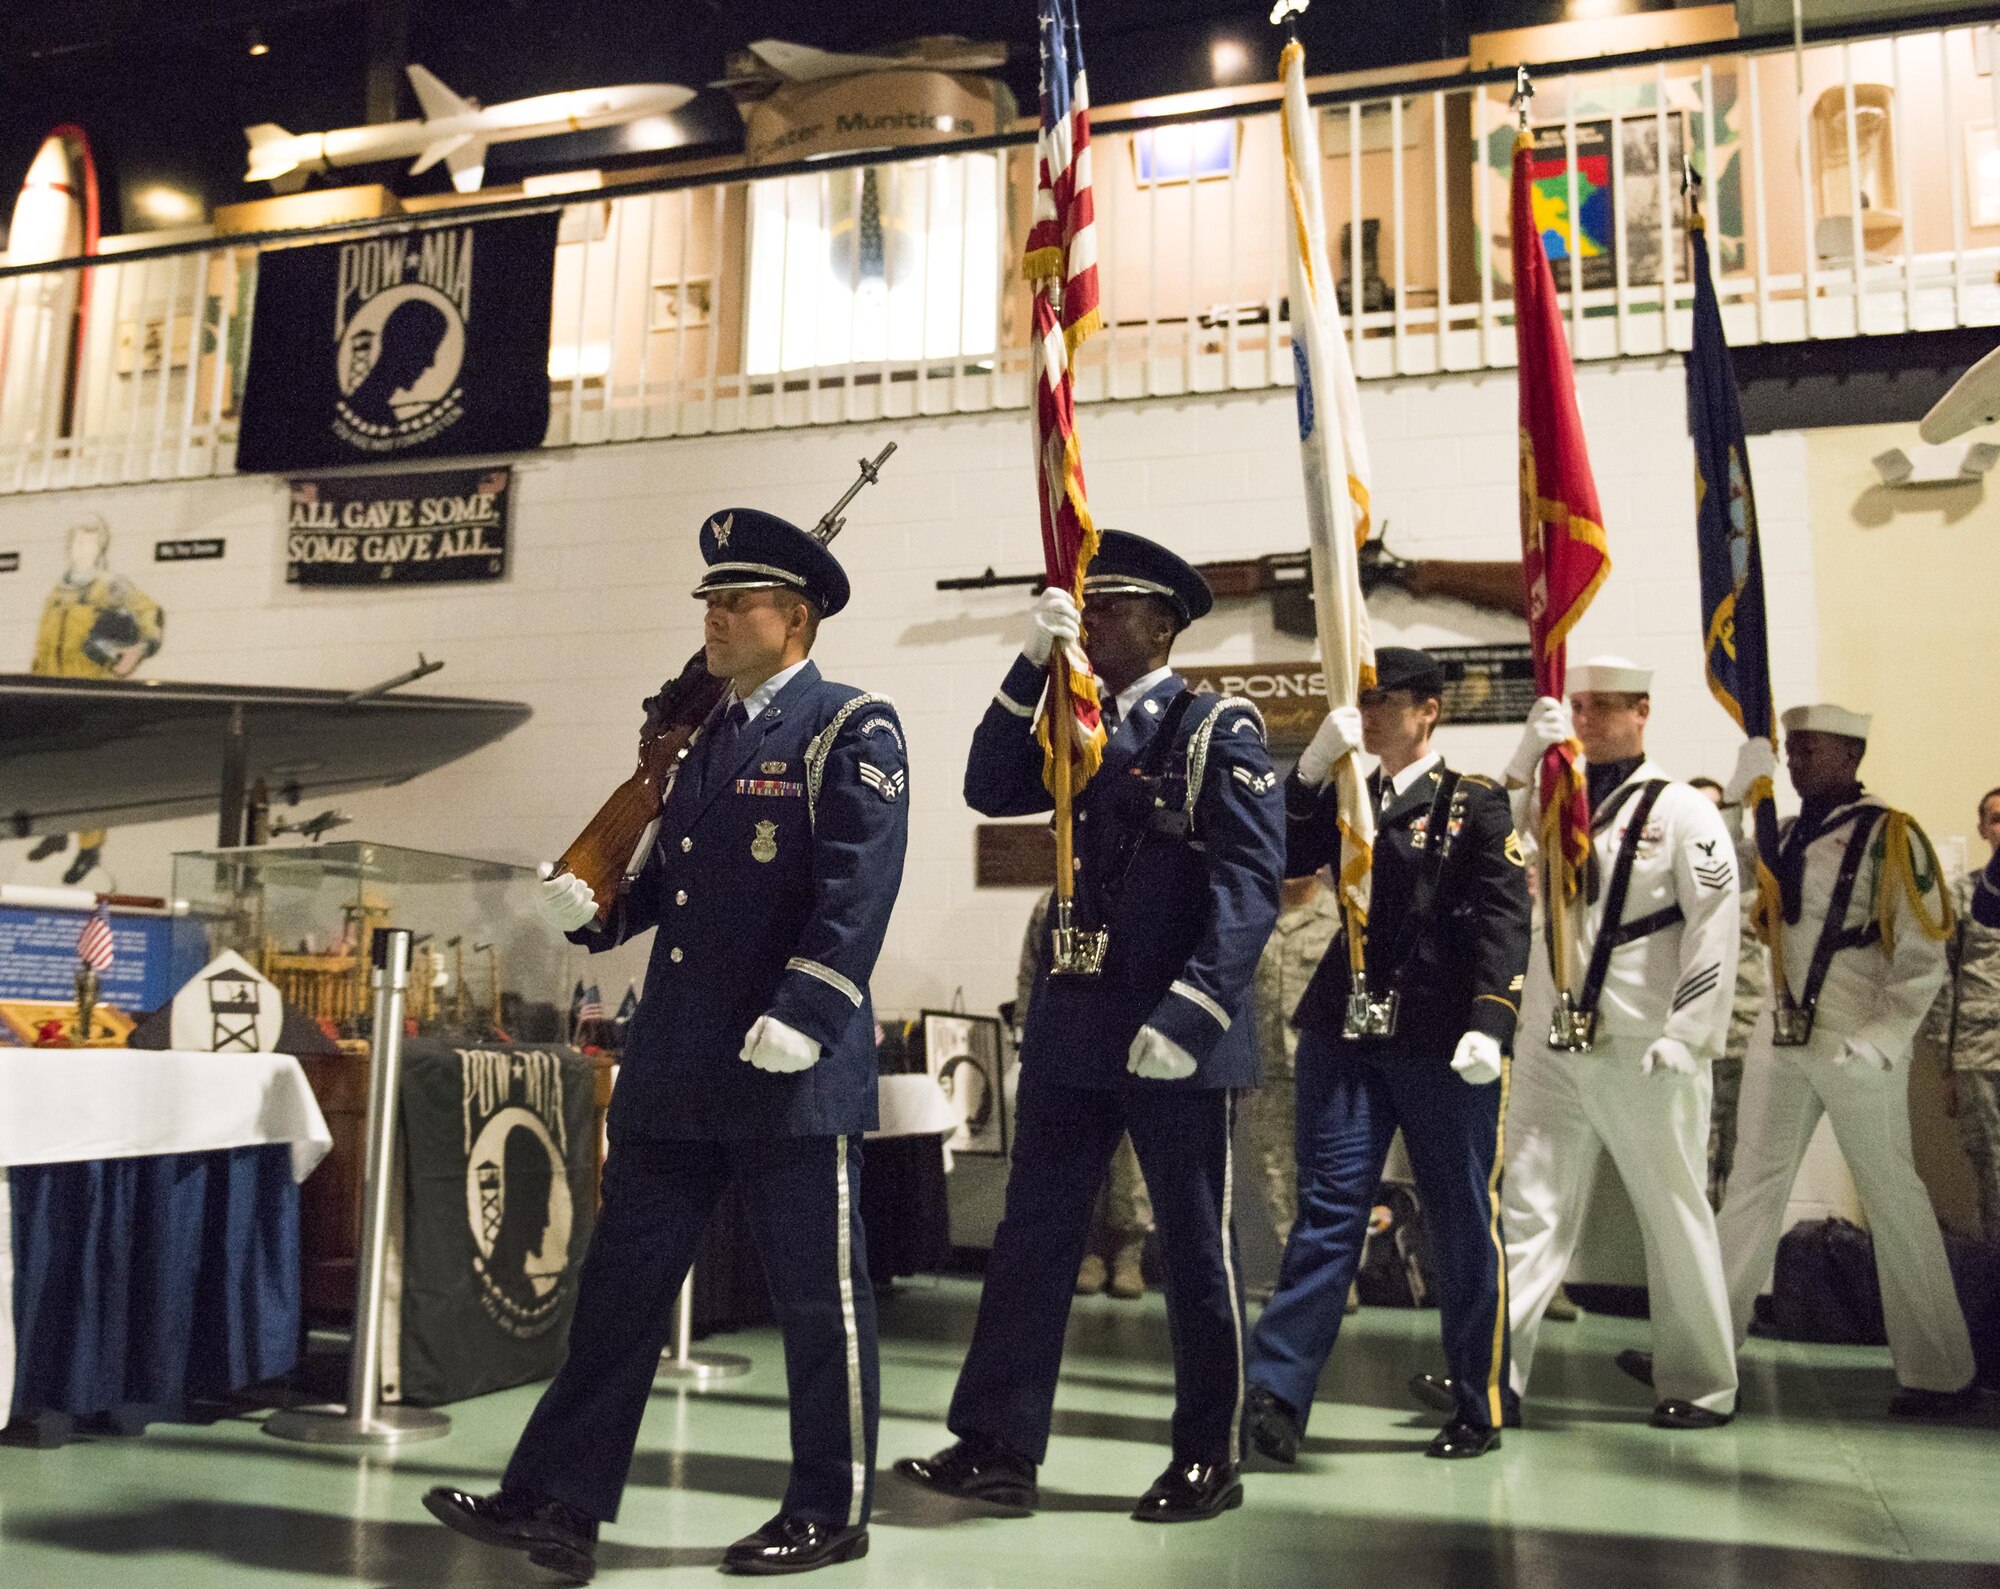 Senior Airman Keith Wheeldon leads a joint service color guard during the presentation of the colors during the POW/MIA Recognition Day ceremony Sept. 16 at the Air Force Armament Museum. The ceremony paid tribute to those military members who have yet to return home from defending America. The event featured tributes, guest speakers, honor guard procedures and a 53rd Wing F-15 and F-16 flyover. (U.S. Air Force photo/Samuel King Jr.)